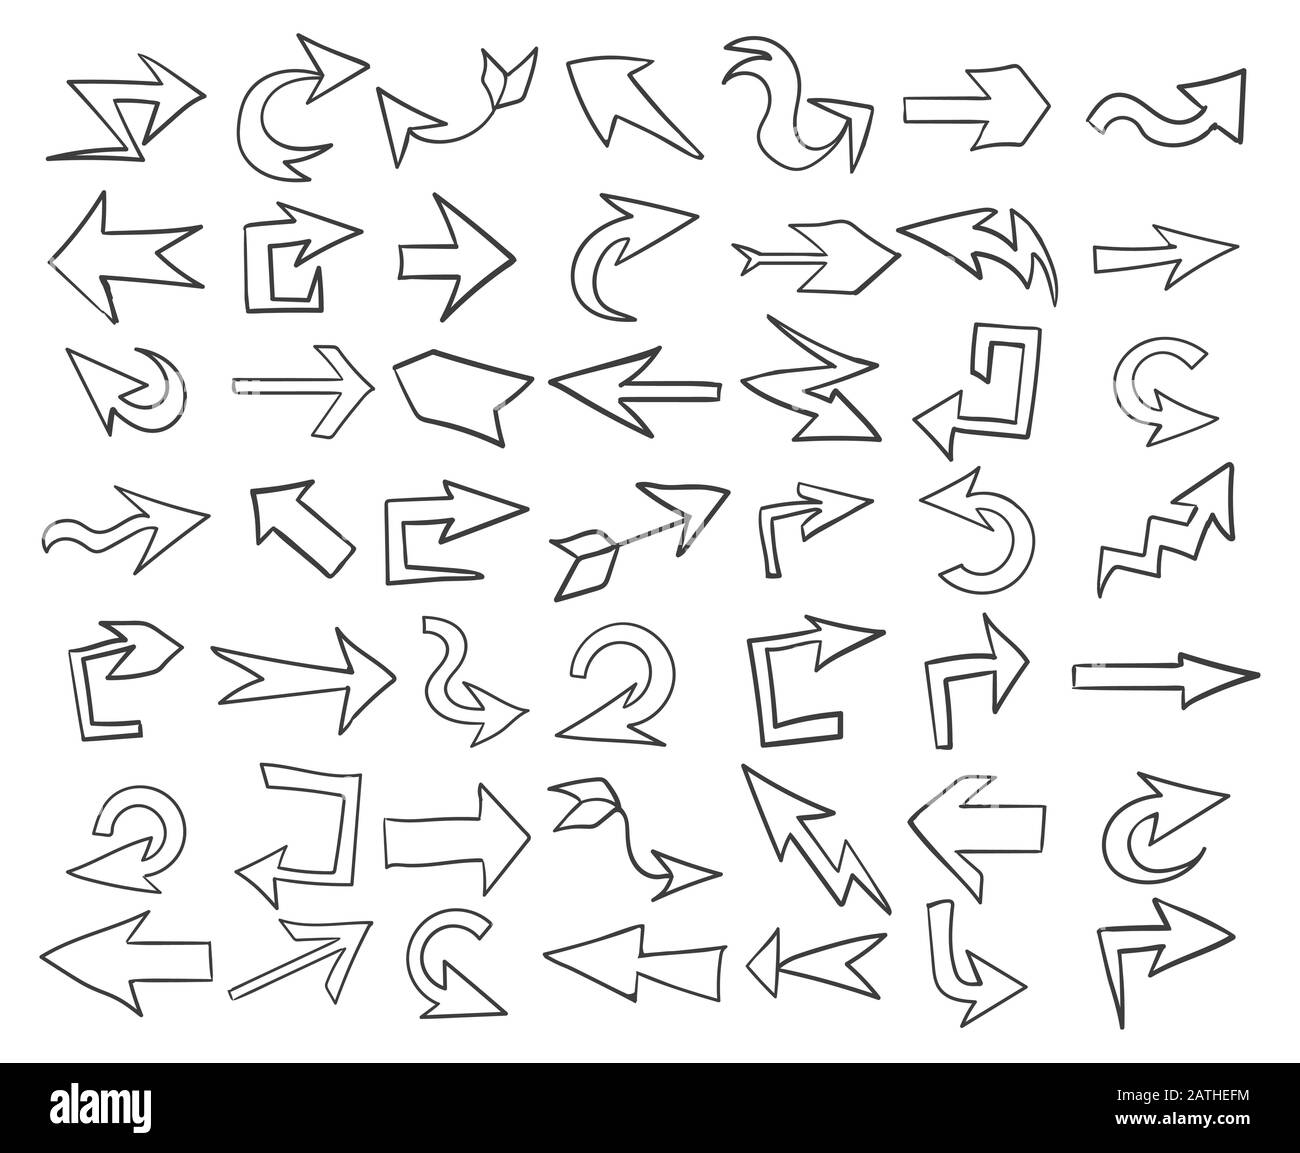 Hand drawn direction arrows Stock Vector